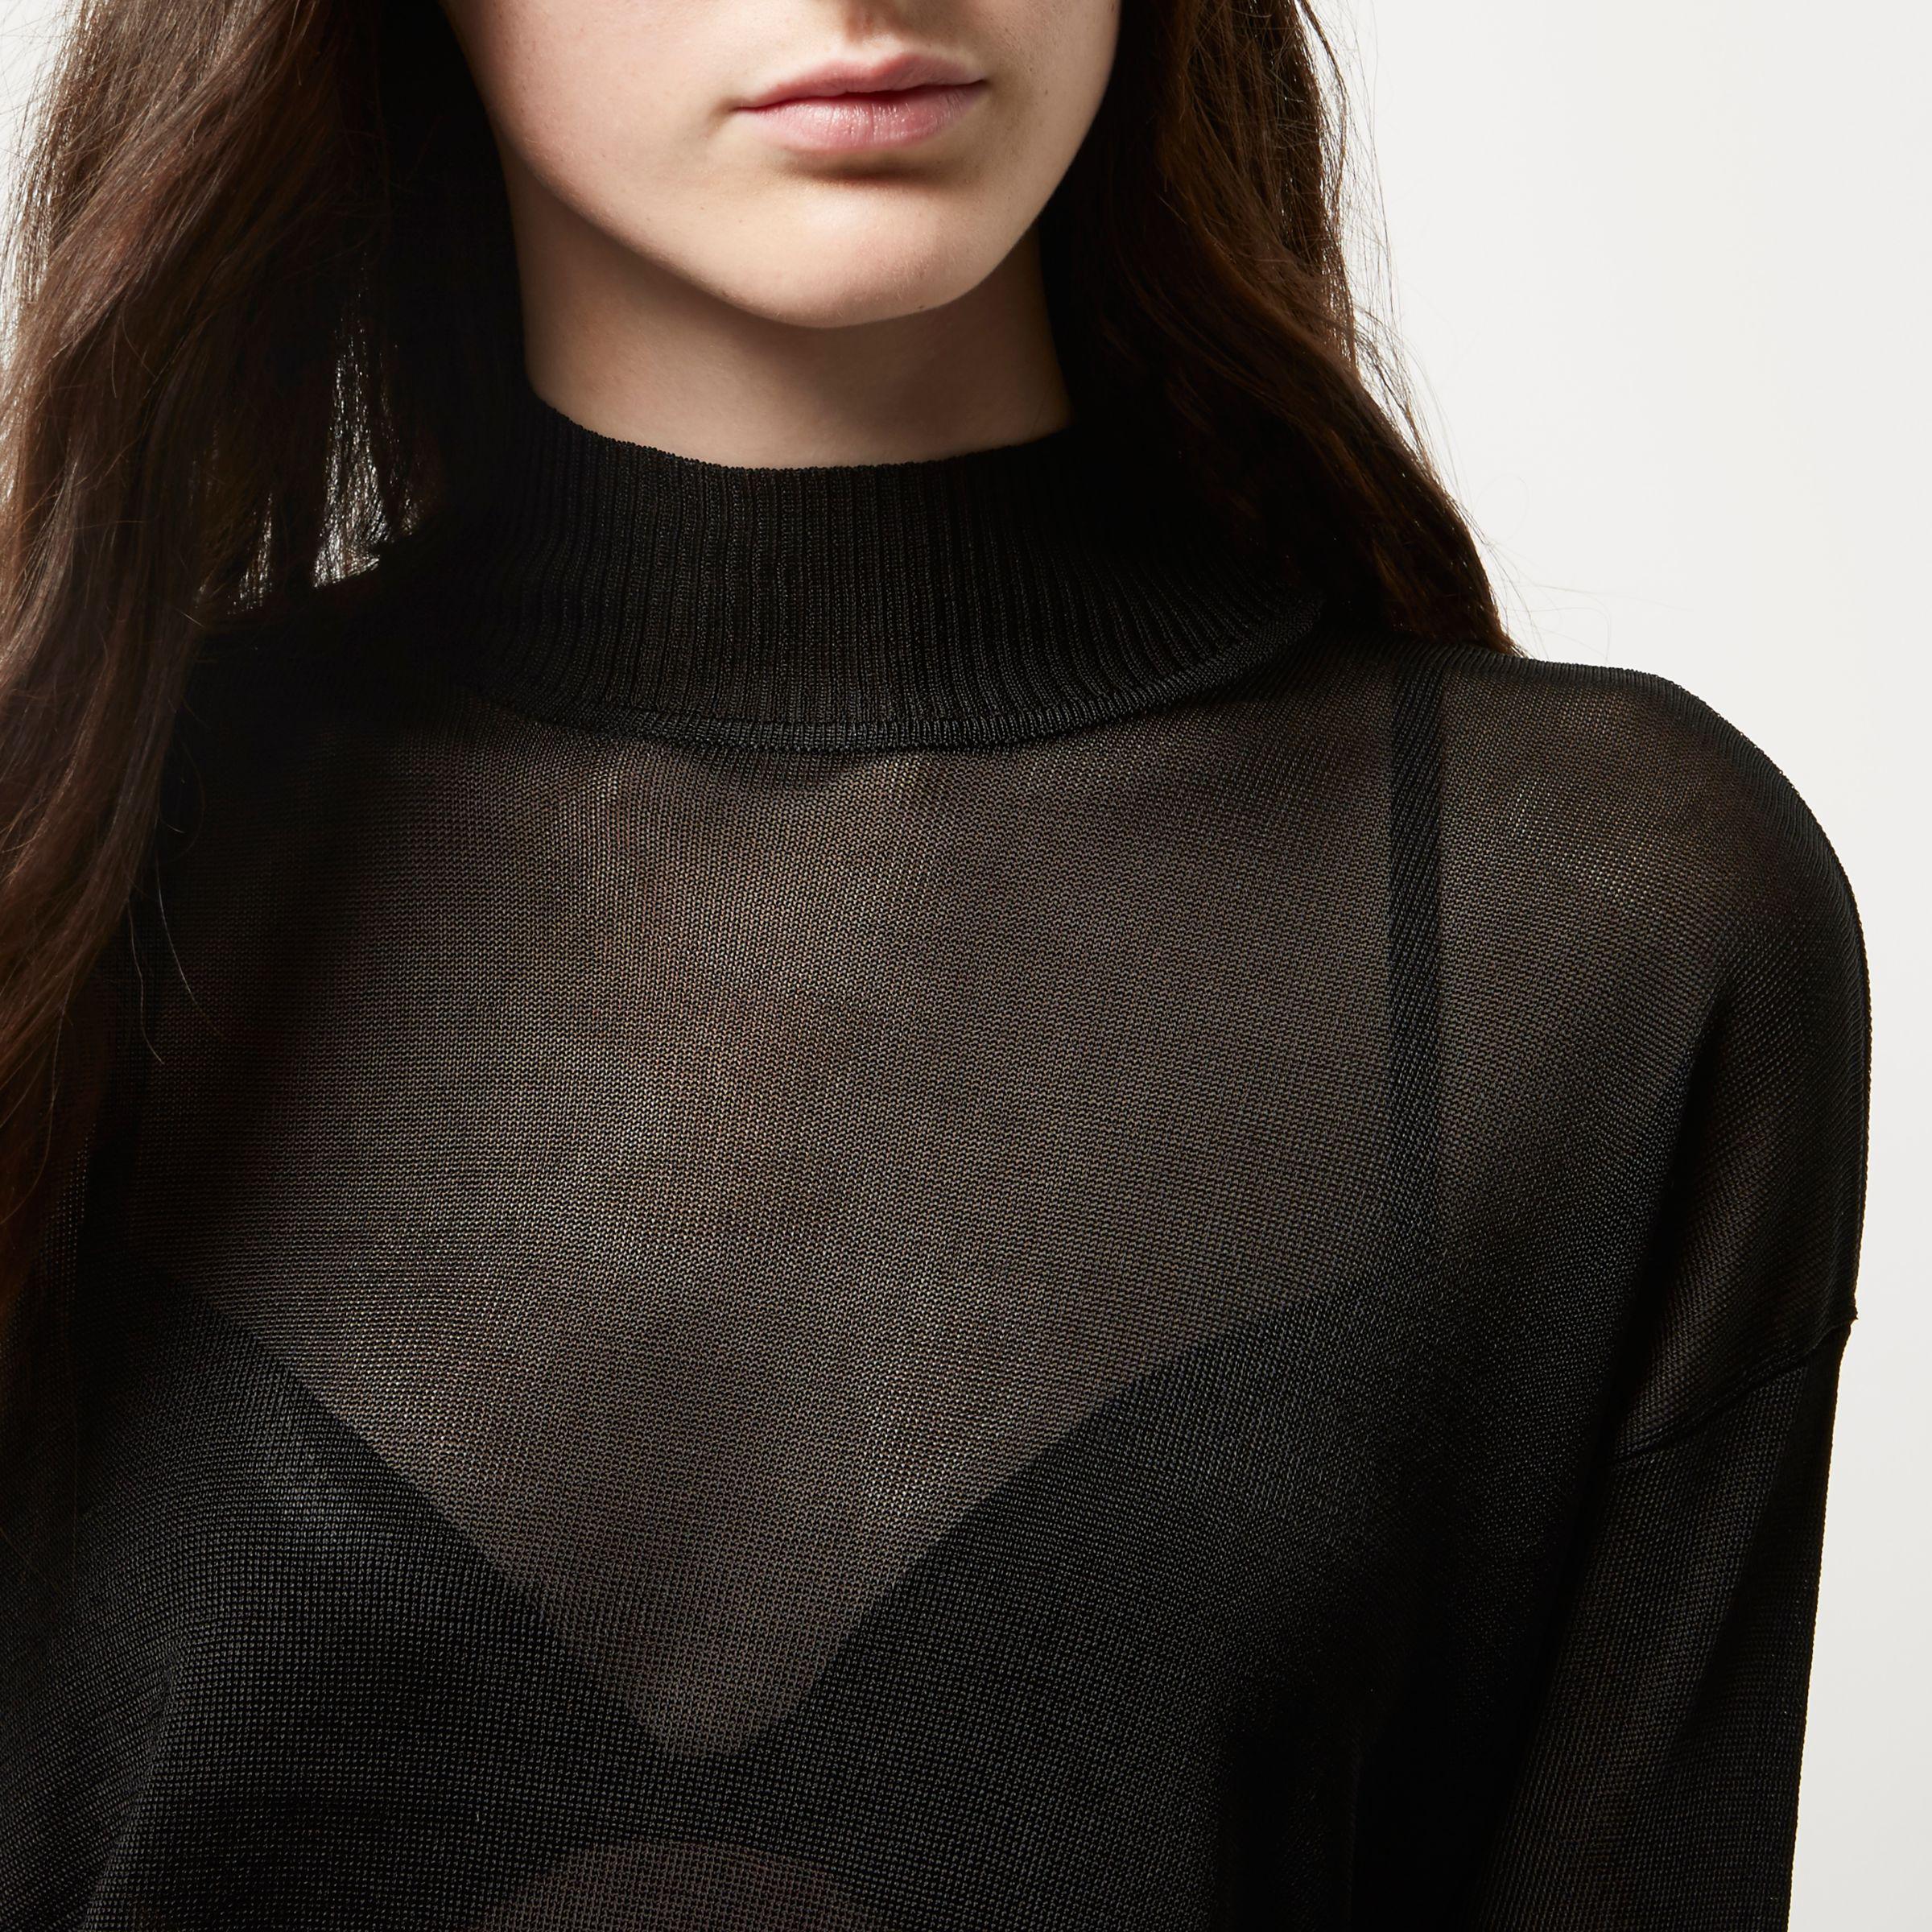 River Island Synthetic Black Sheer Knit Turtleneck Top - Lyst